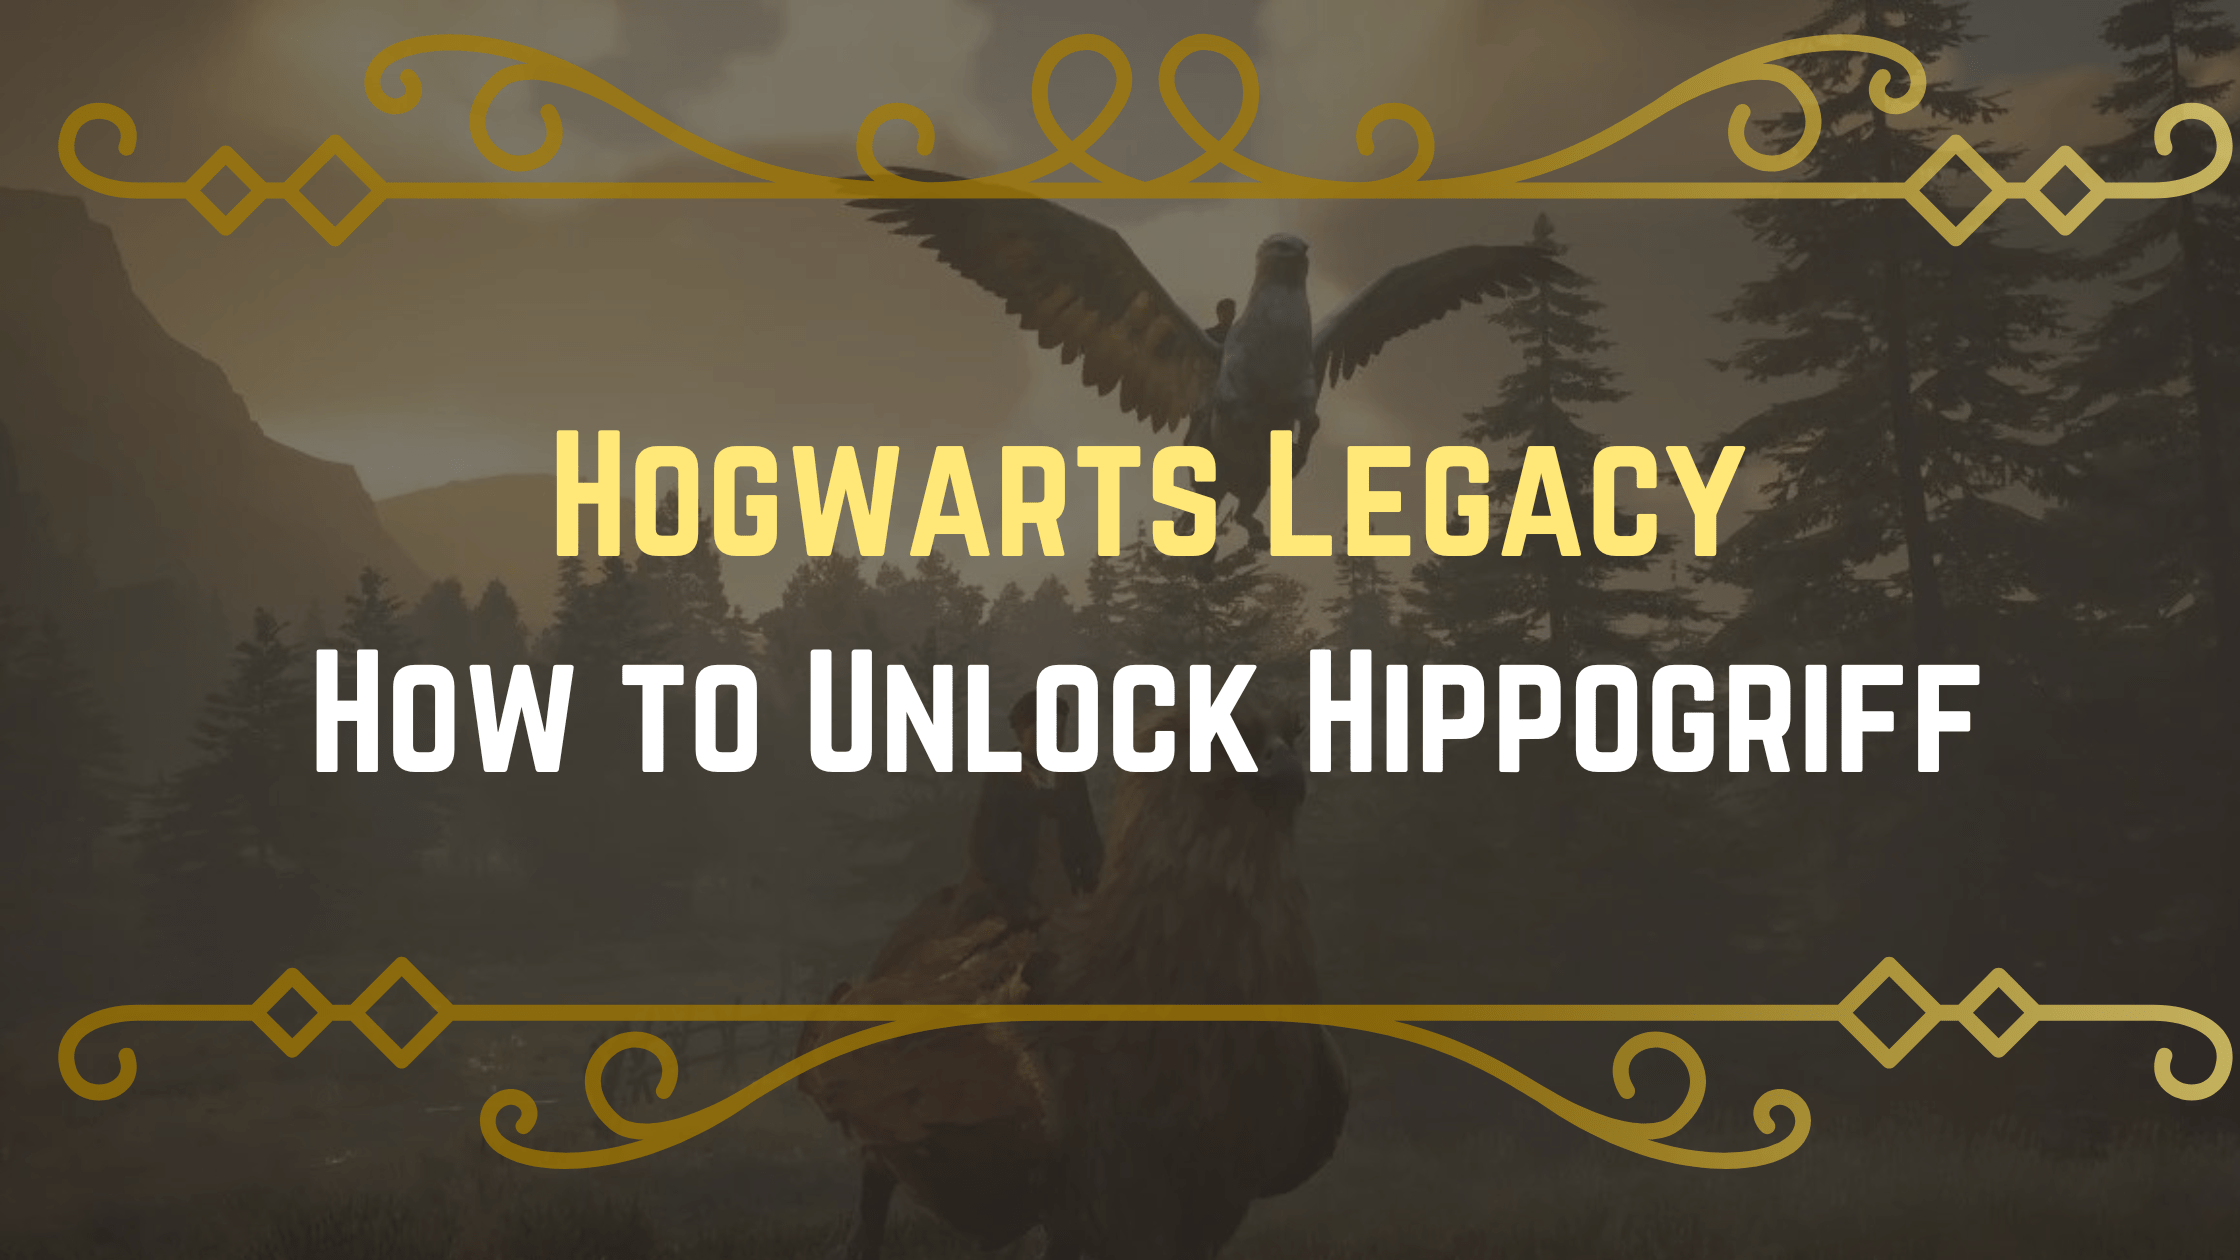 How to Unlock Hippogriff